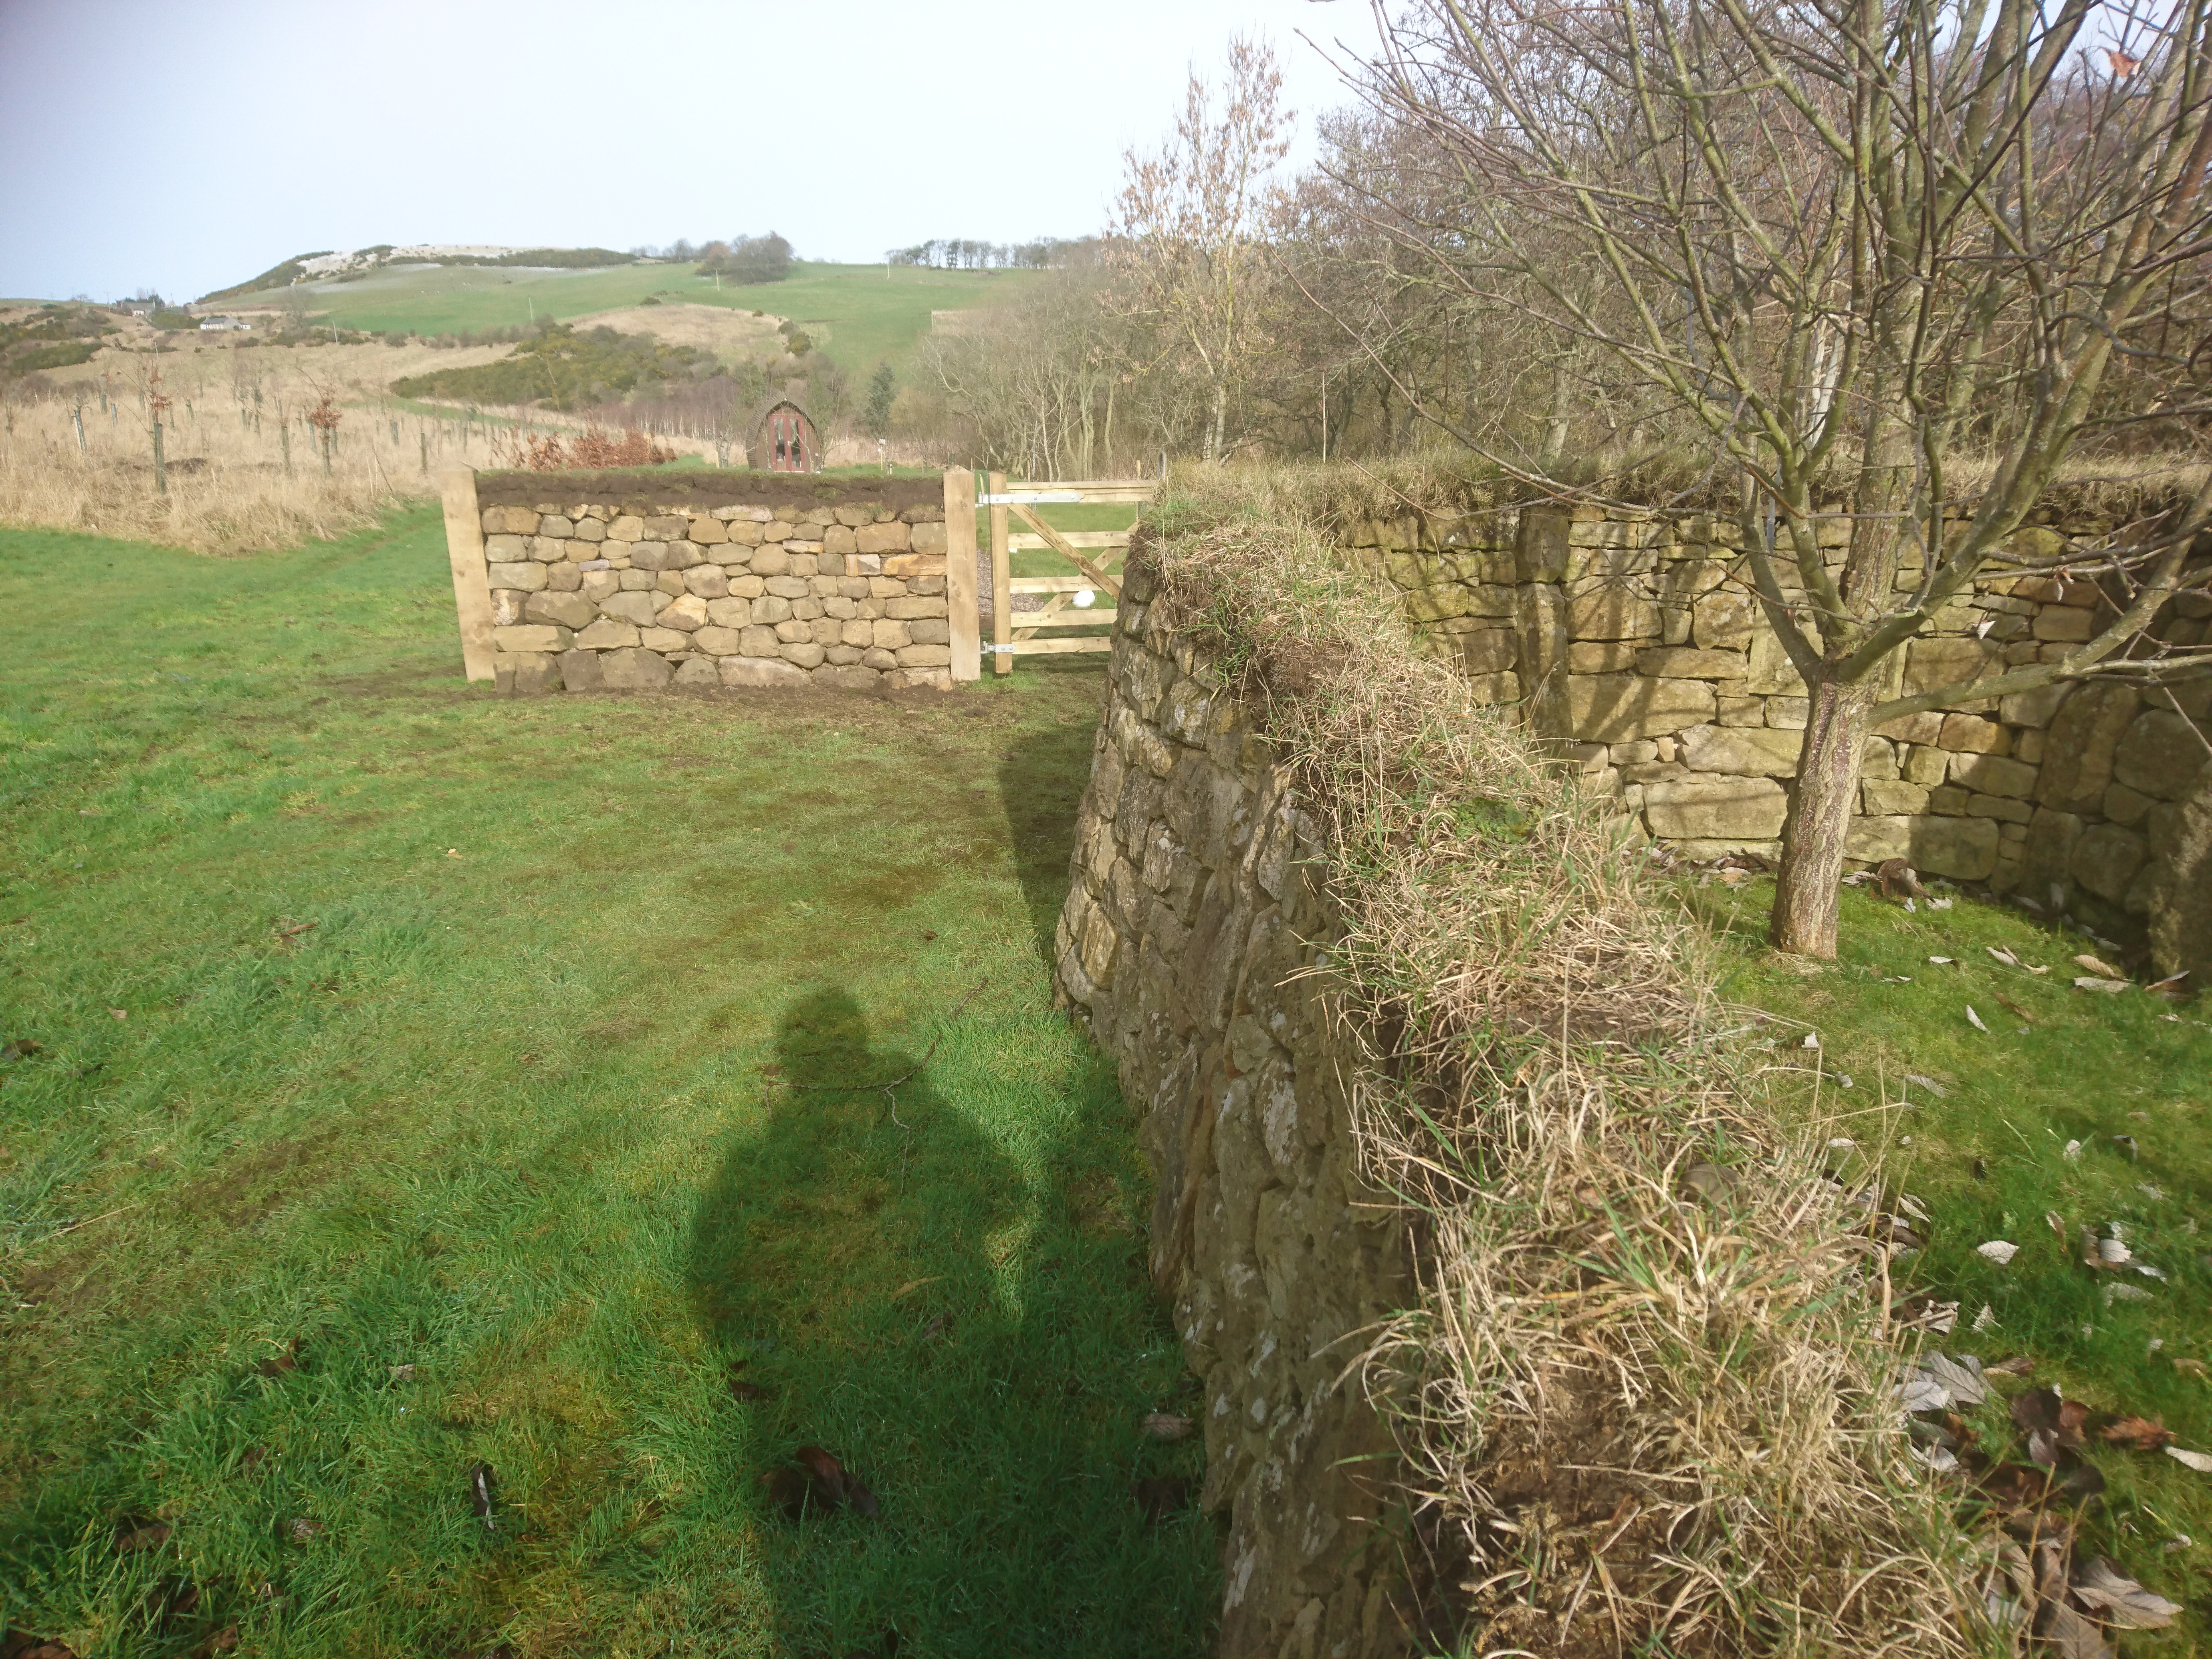 Free-standing dry stone walls